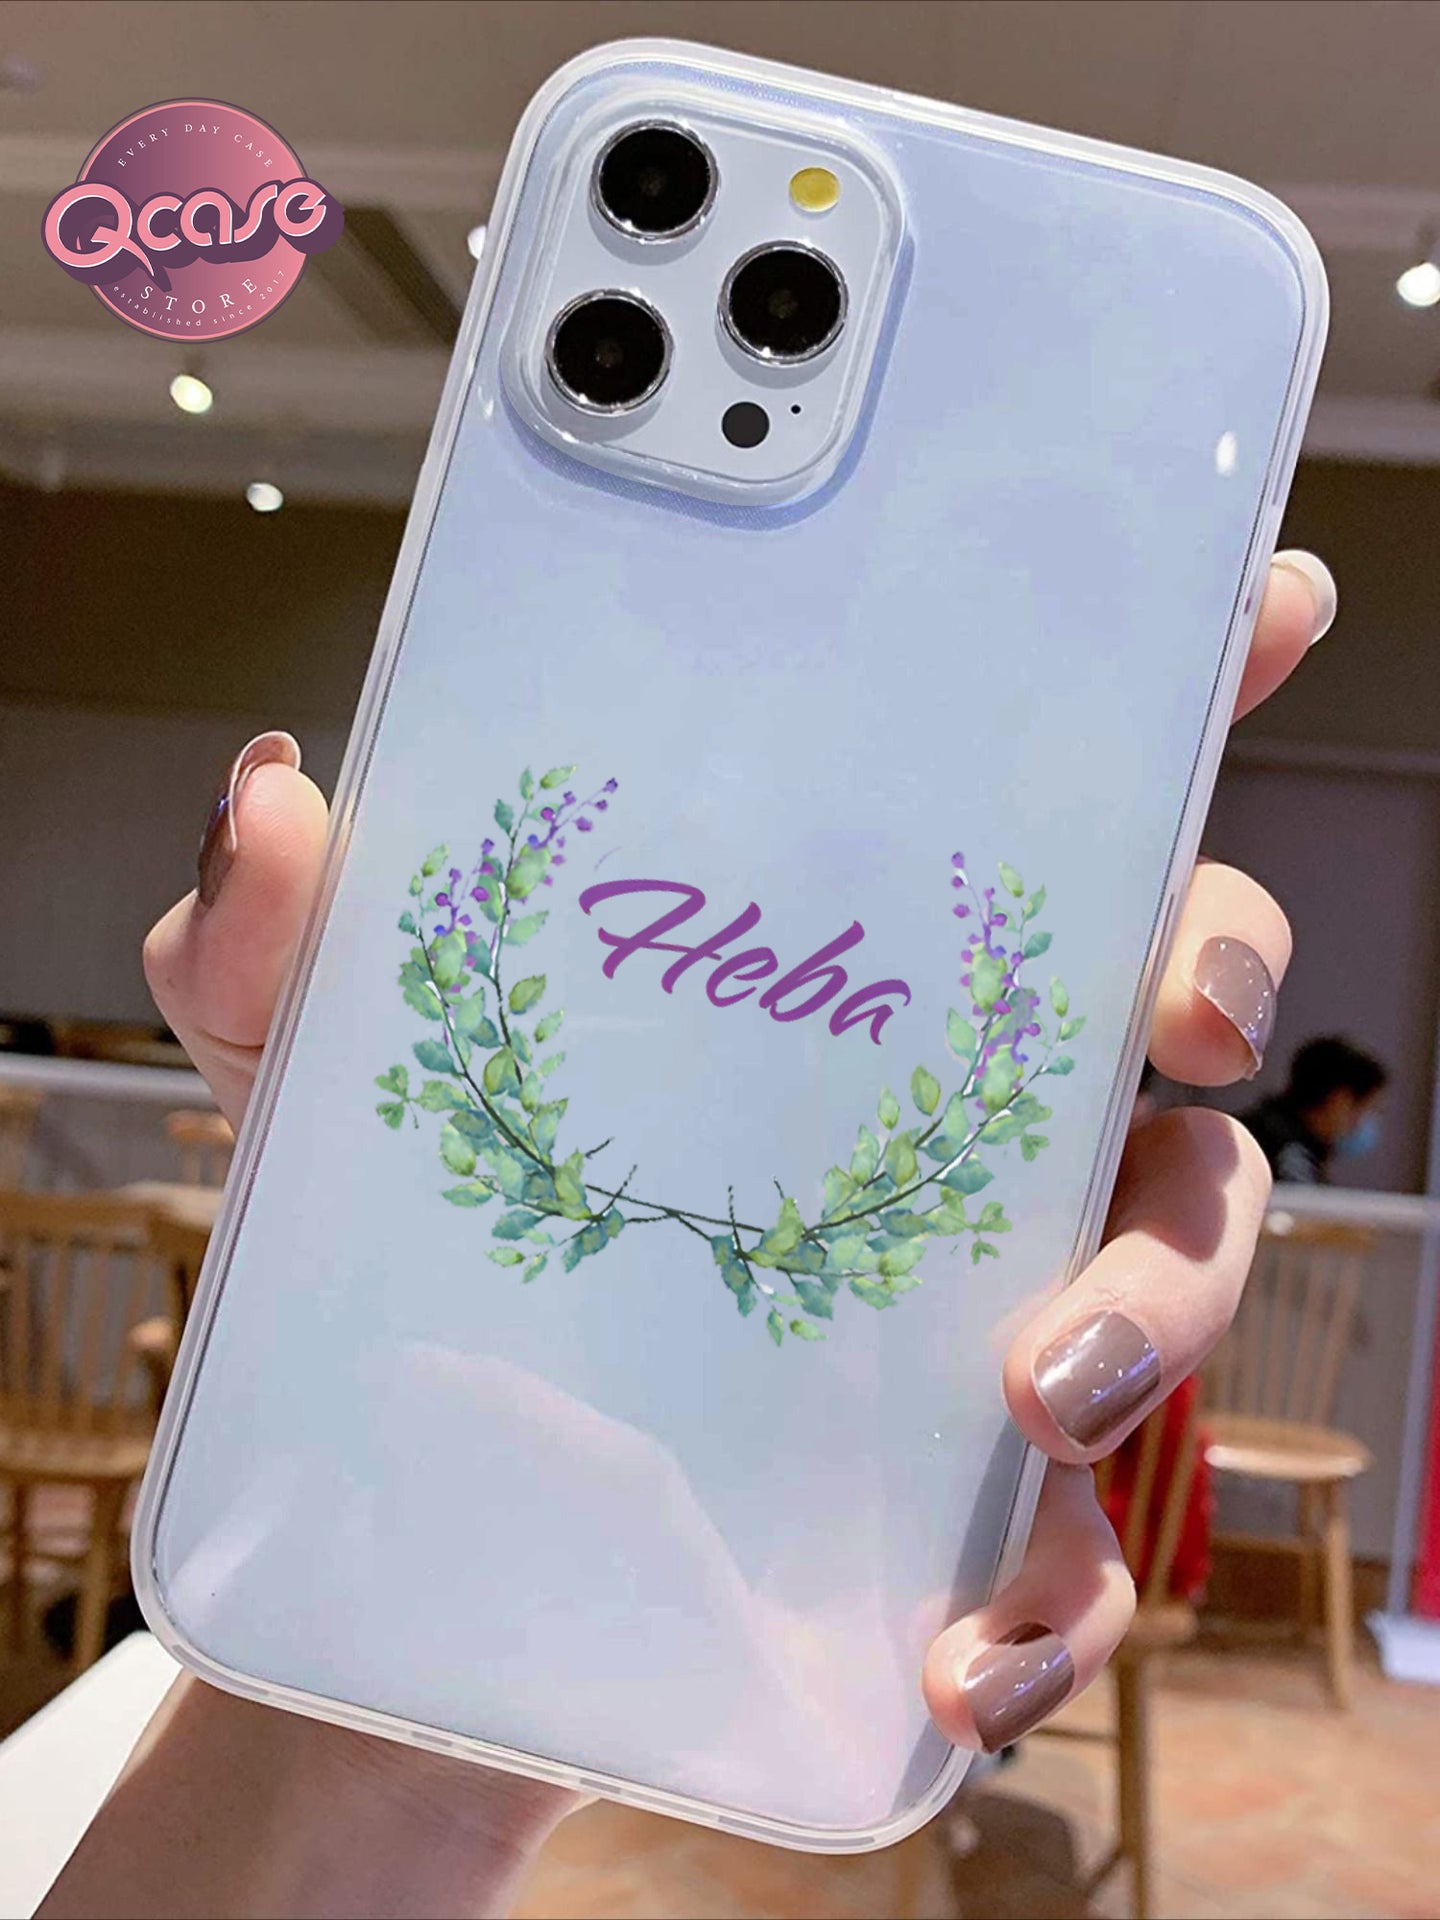 Design and name phone cover 6